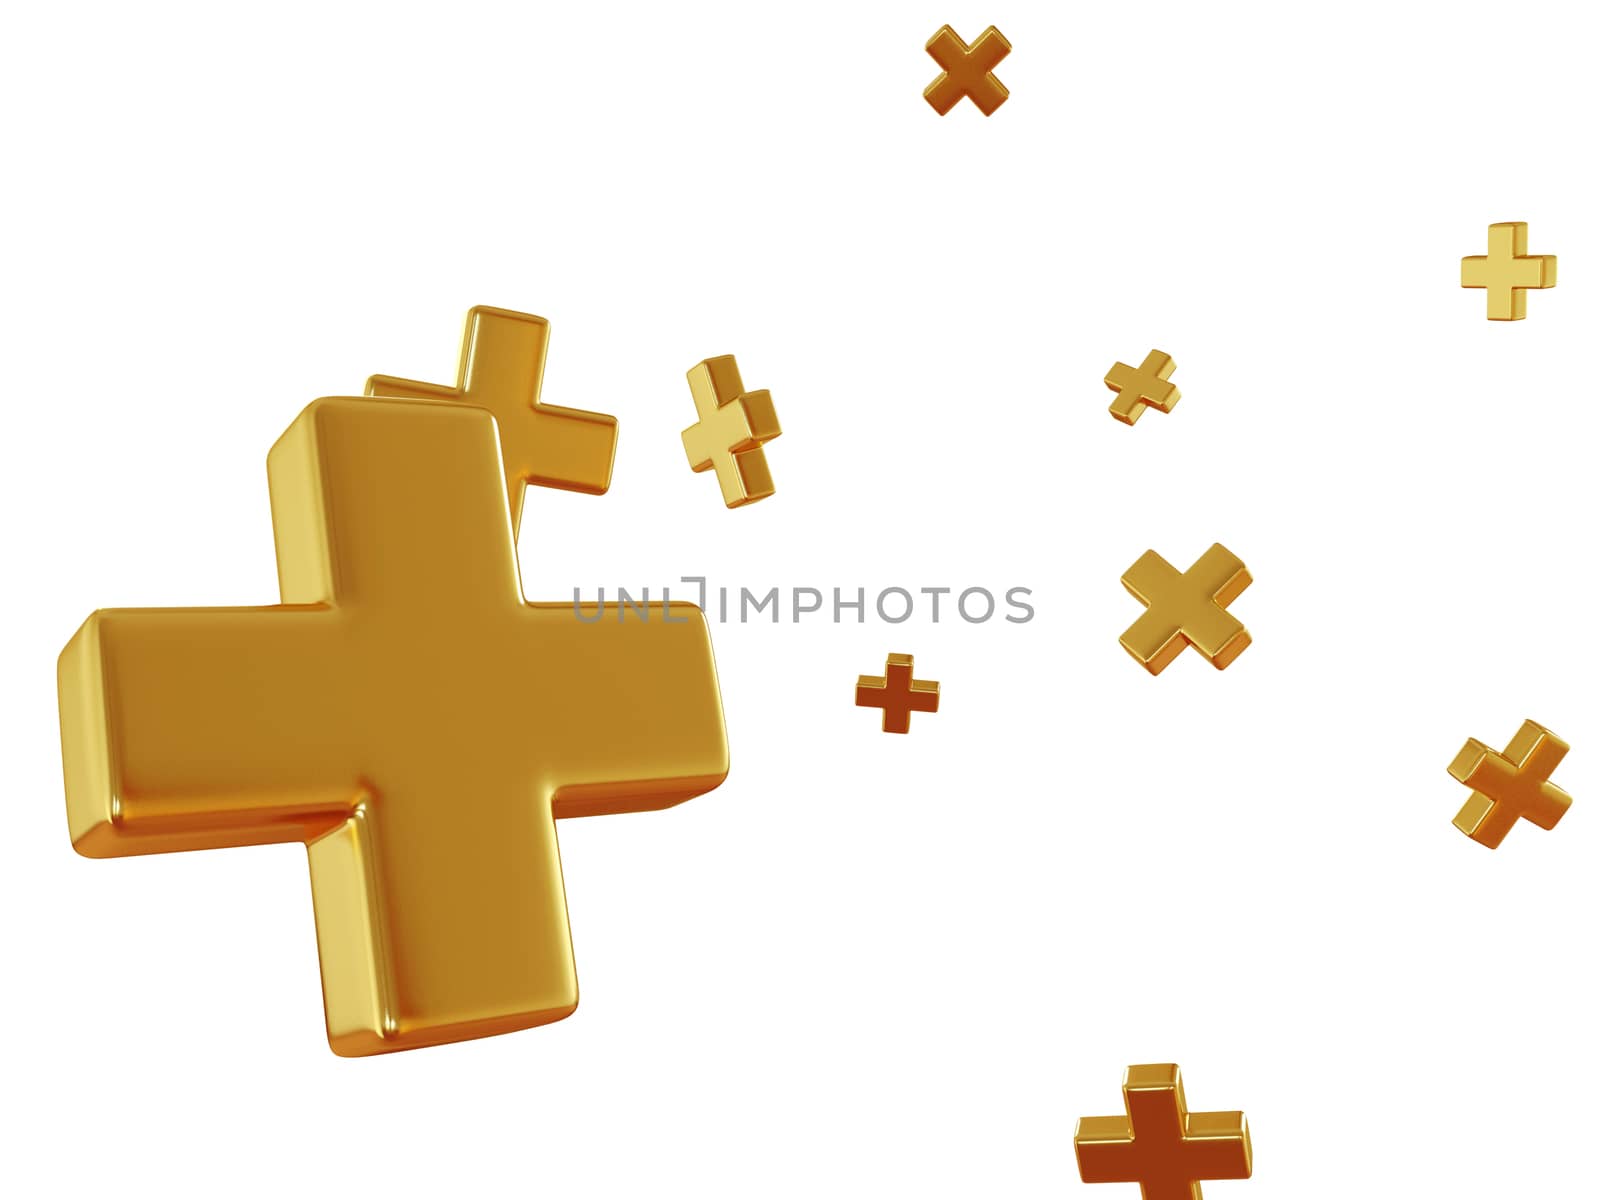 There are some Gold-colored cross-models in space.